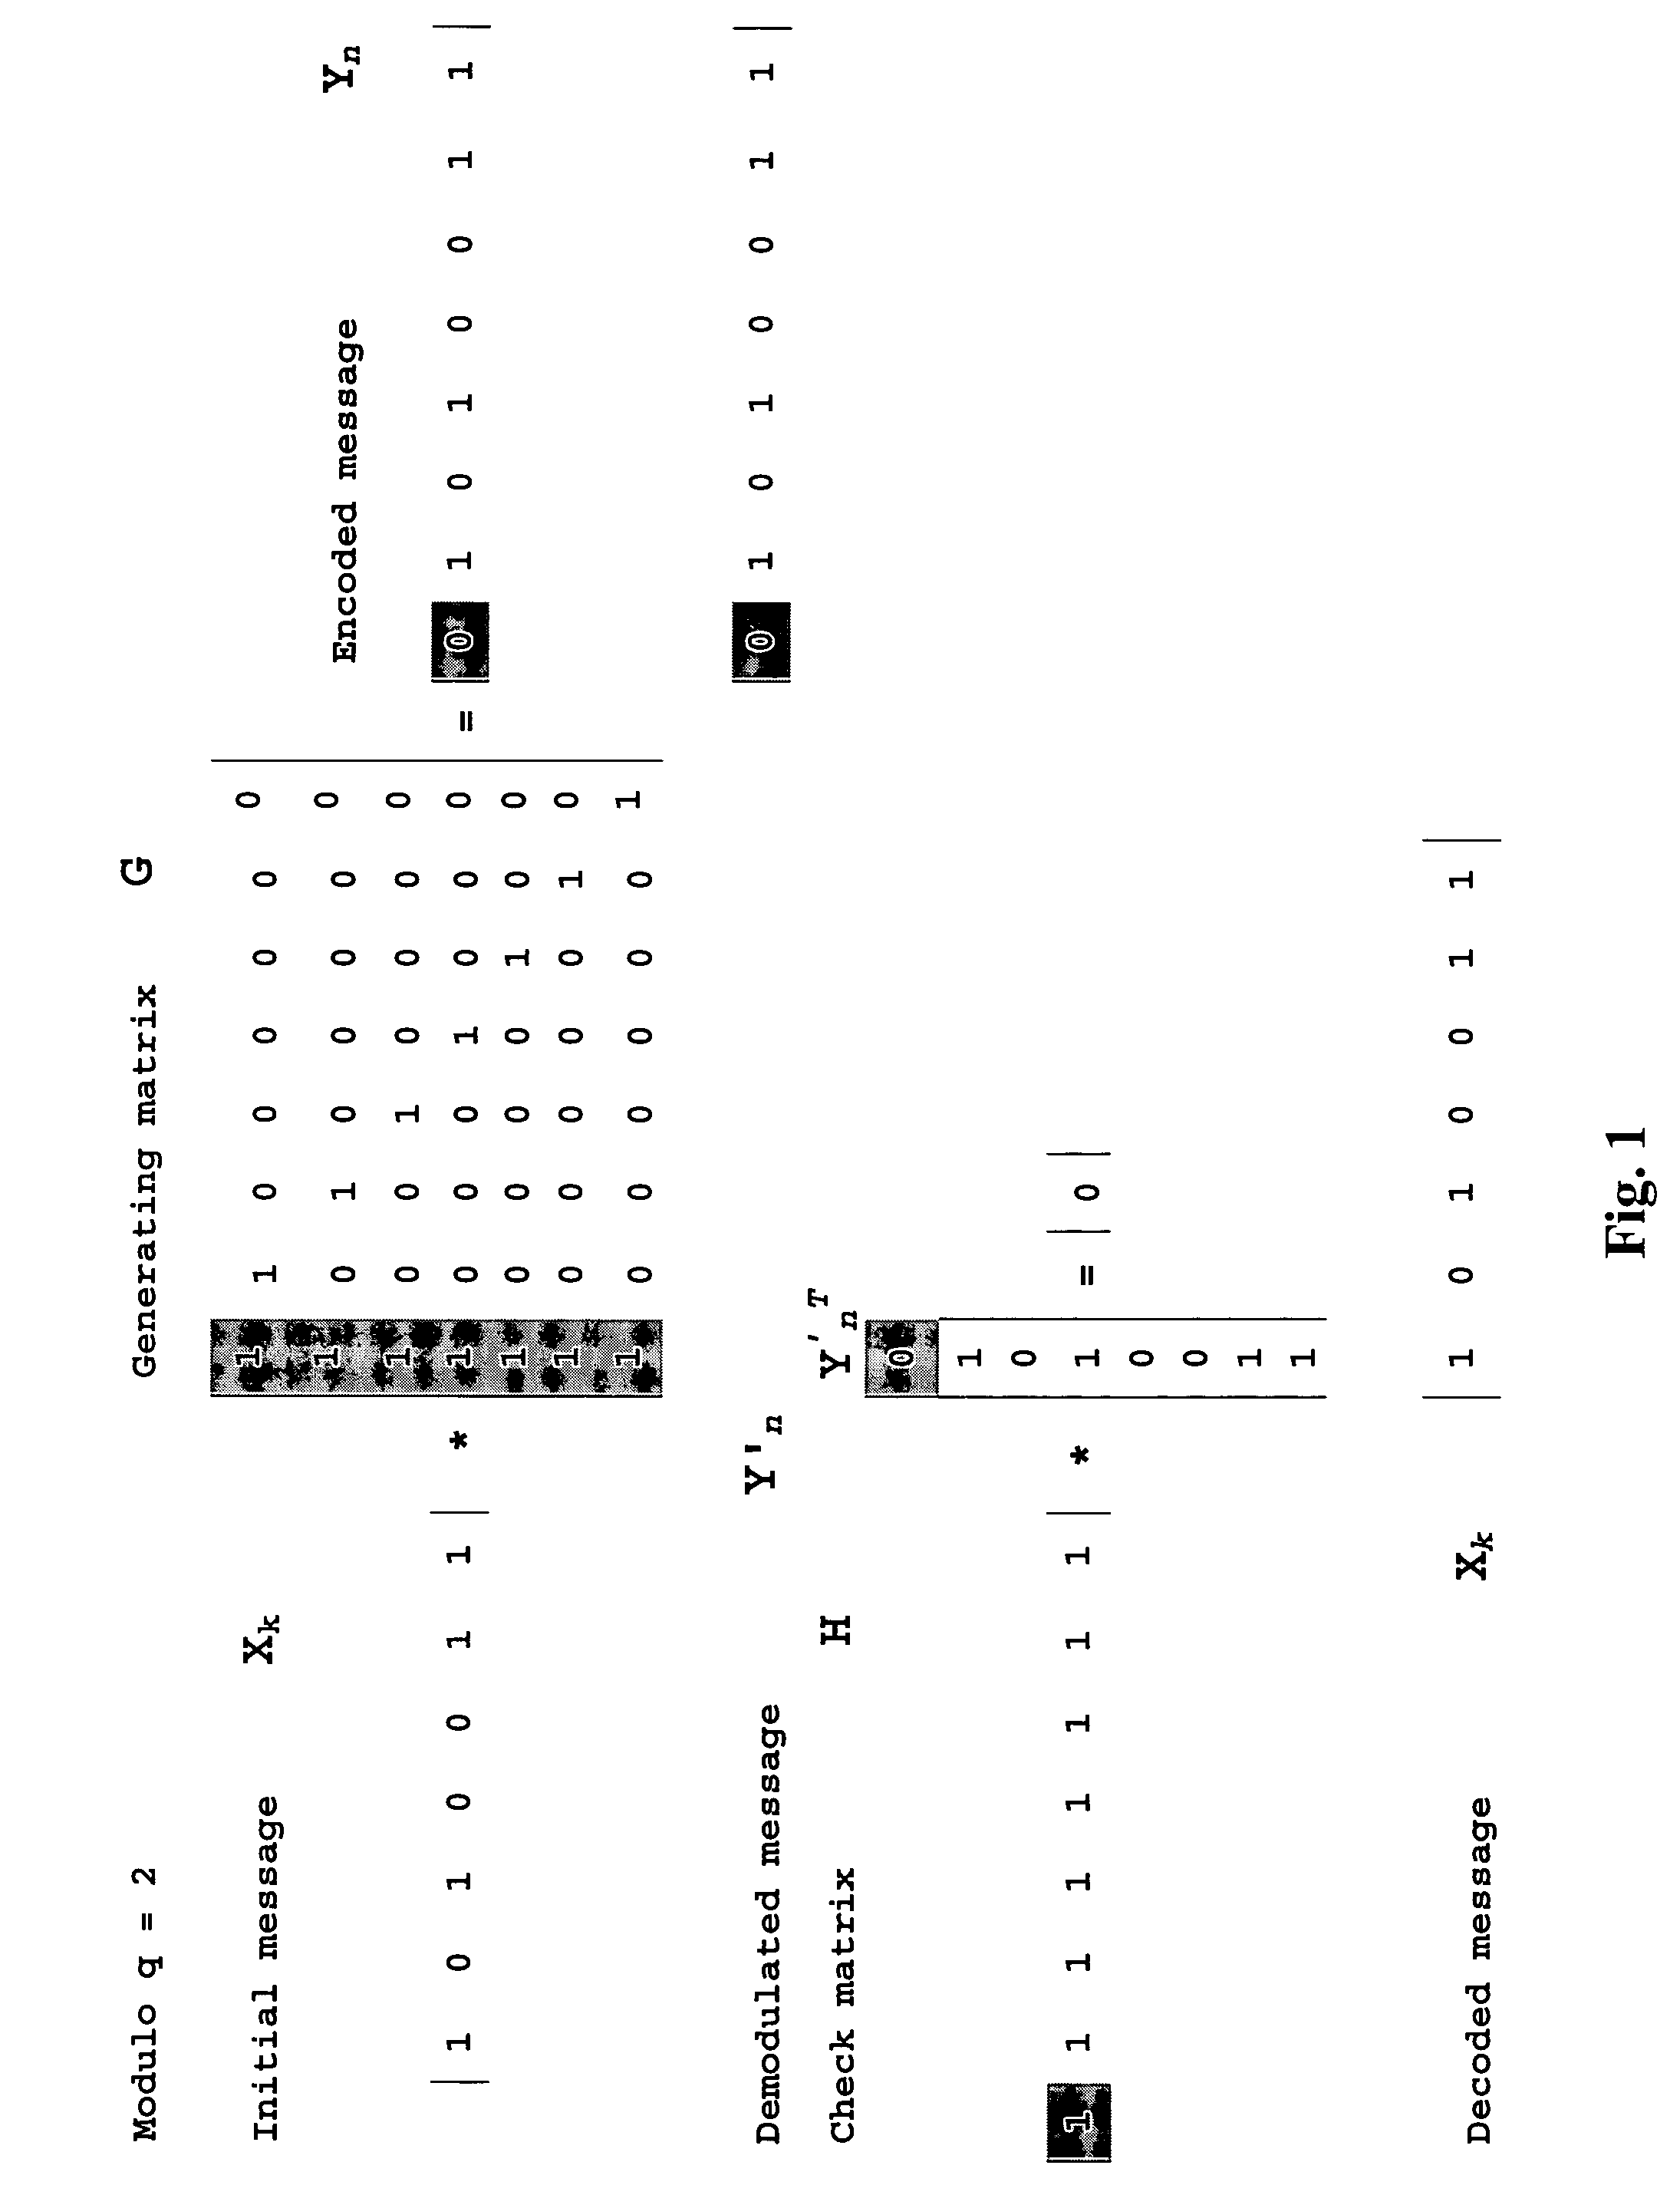 Method for transmitting a digital message and system for carrying out said method